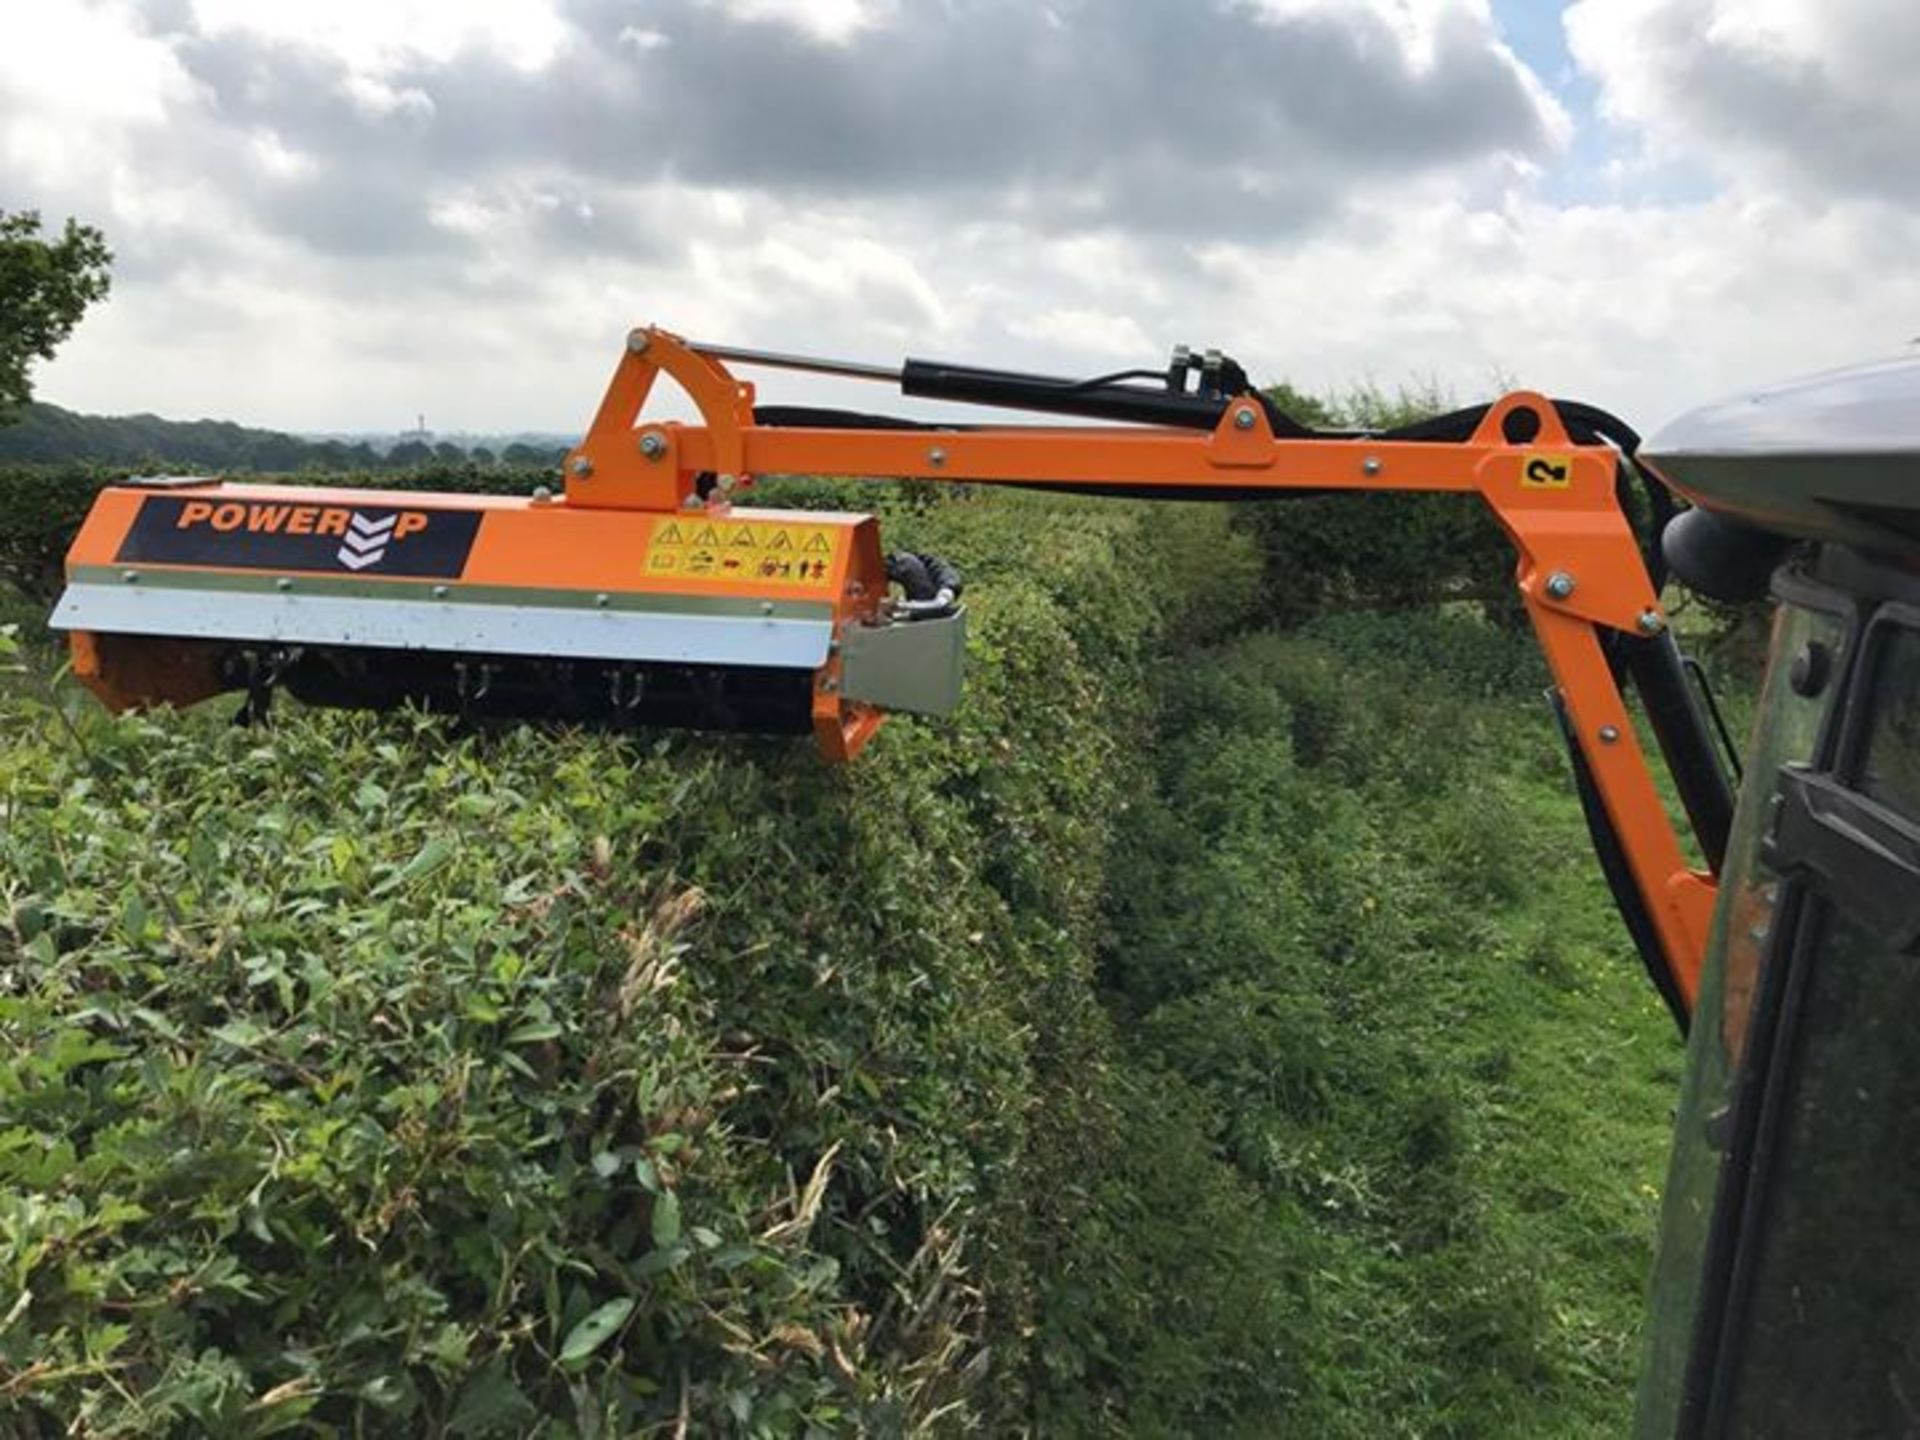 POWER UP A80 HEDGE CUTTER - Image 2 of 7